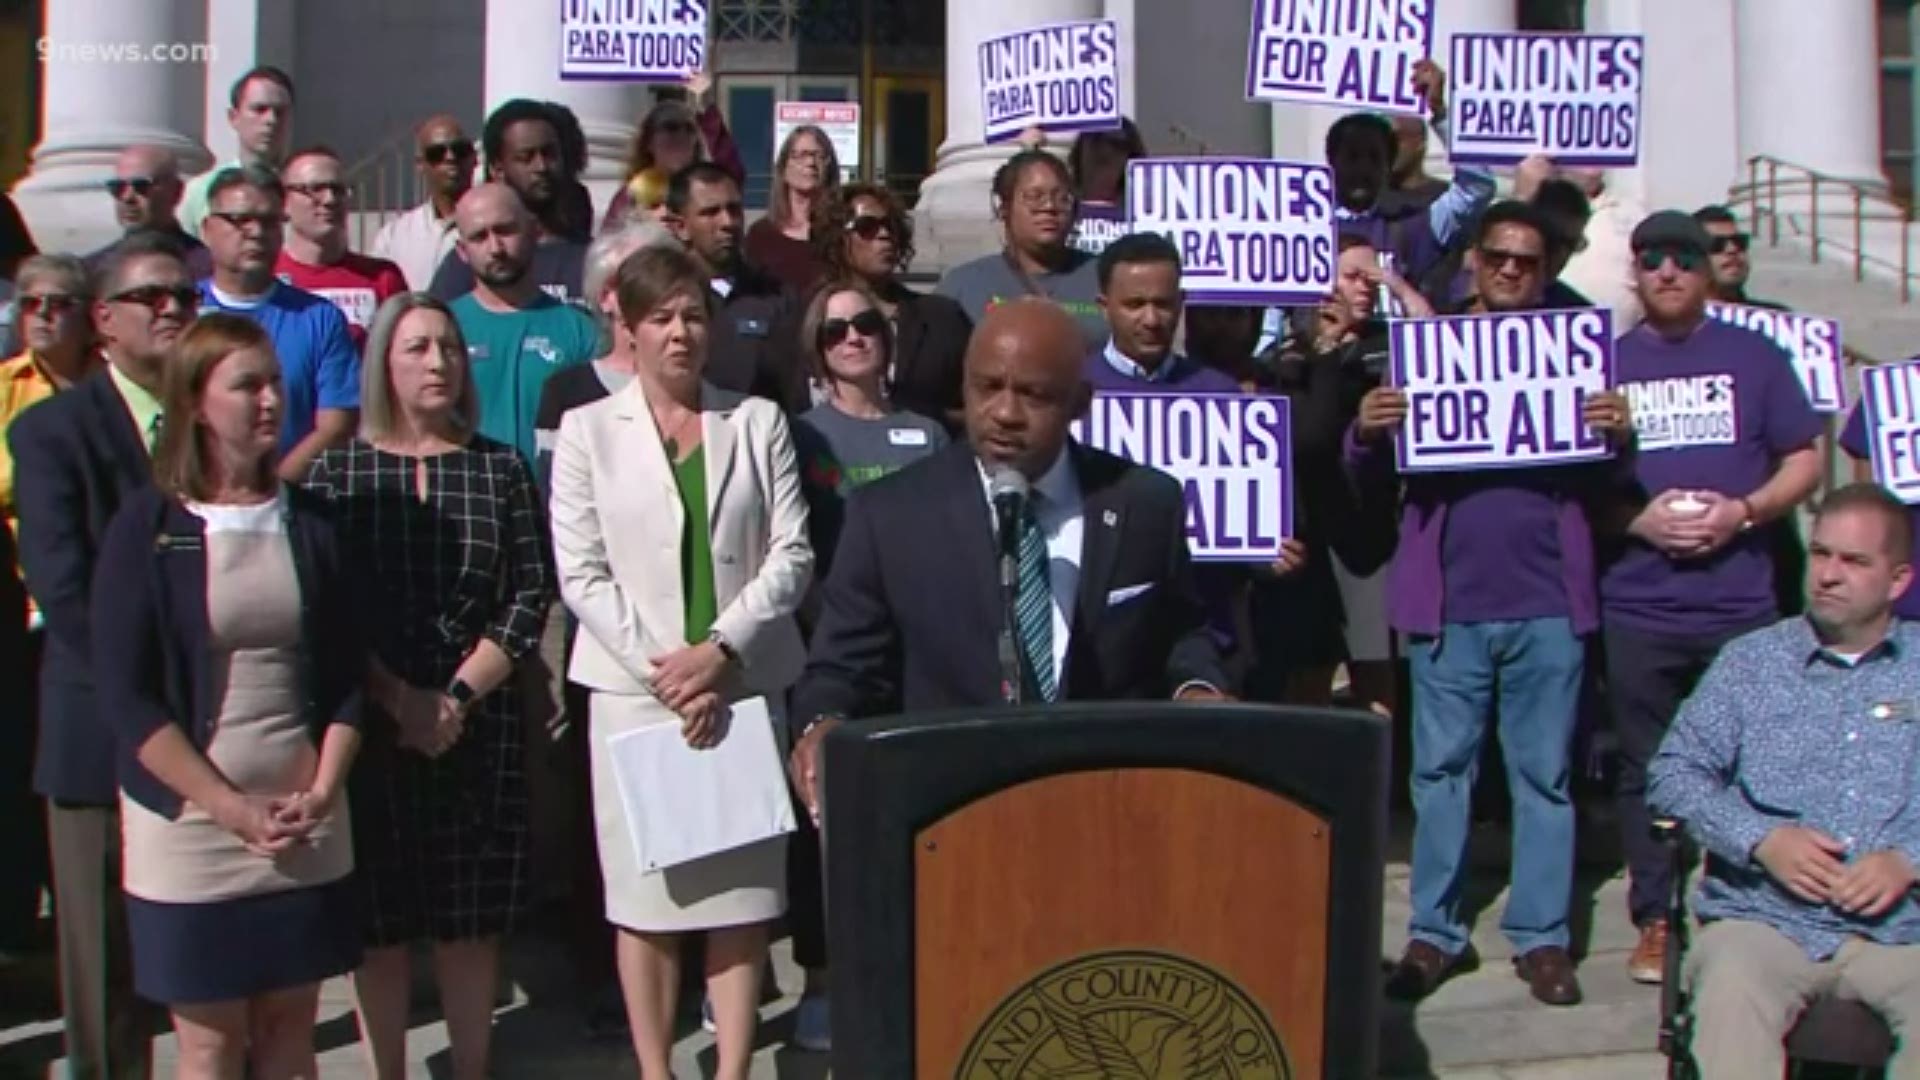 Mayor Michael Hancock and Councilwoman Robin Kniech announced a citywide, $15 minimum wage proposal that could impact more than 100,000 Denver workers.